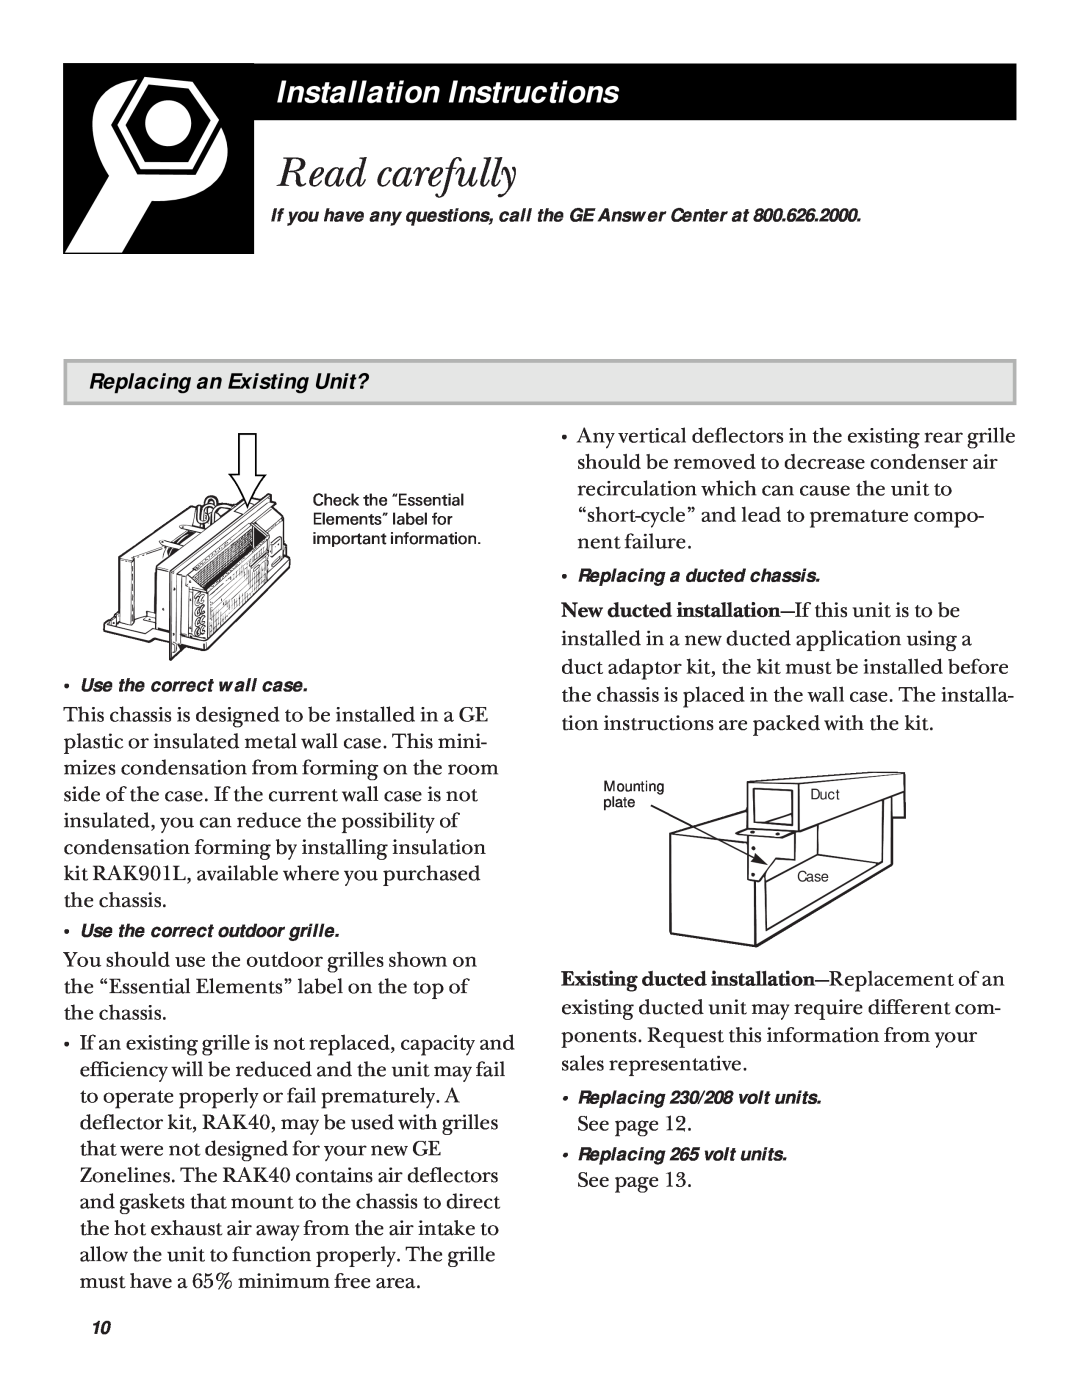 GE 3200 Read carefully, Installation Instructions, Replacing an Existing Unit?, Use the correct wall case 